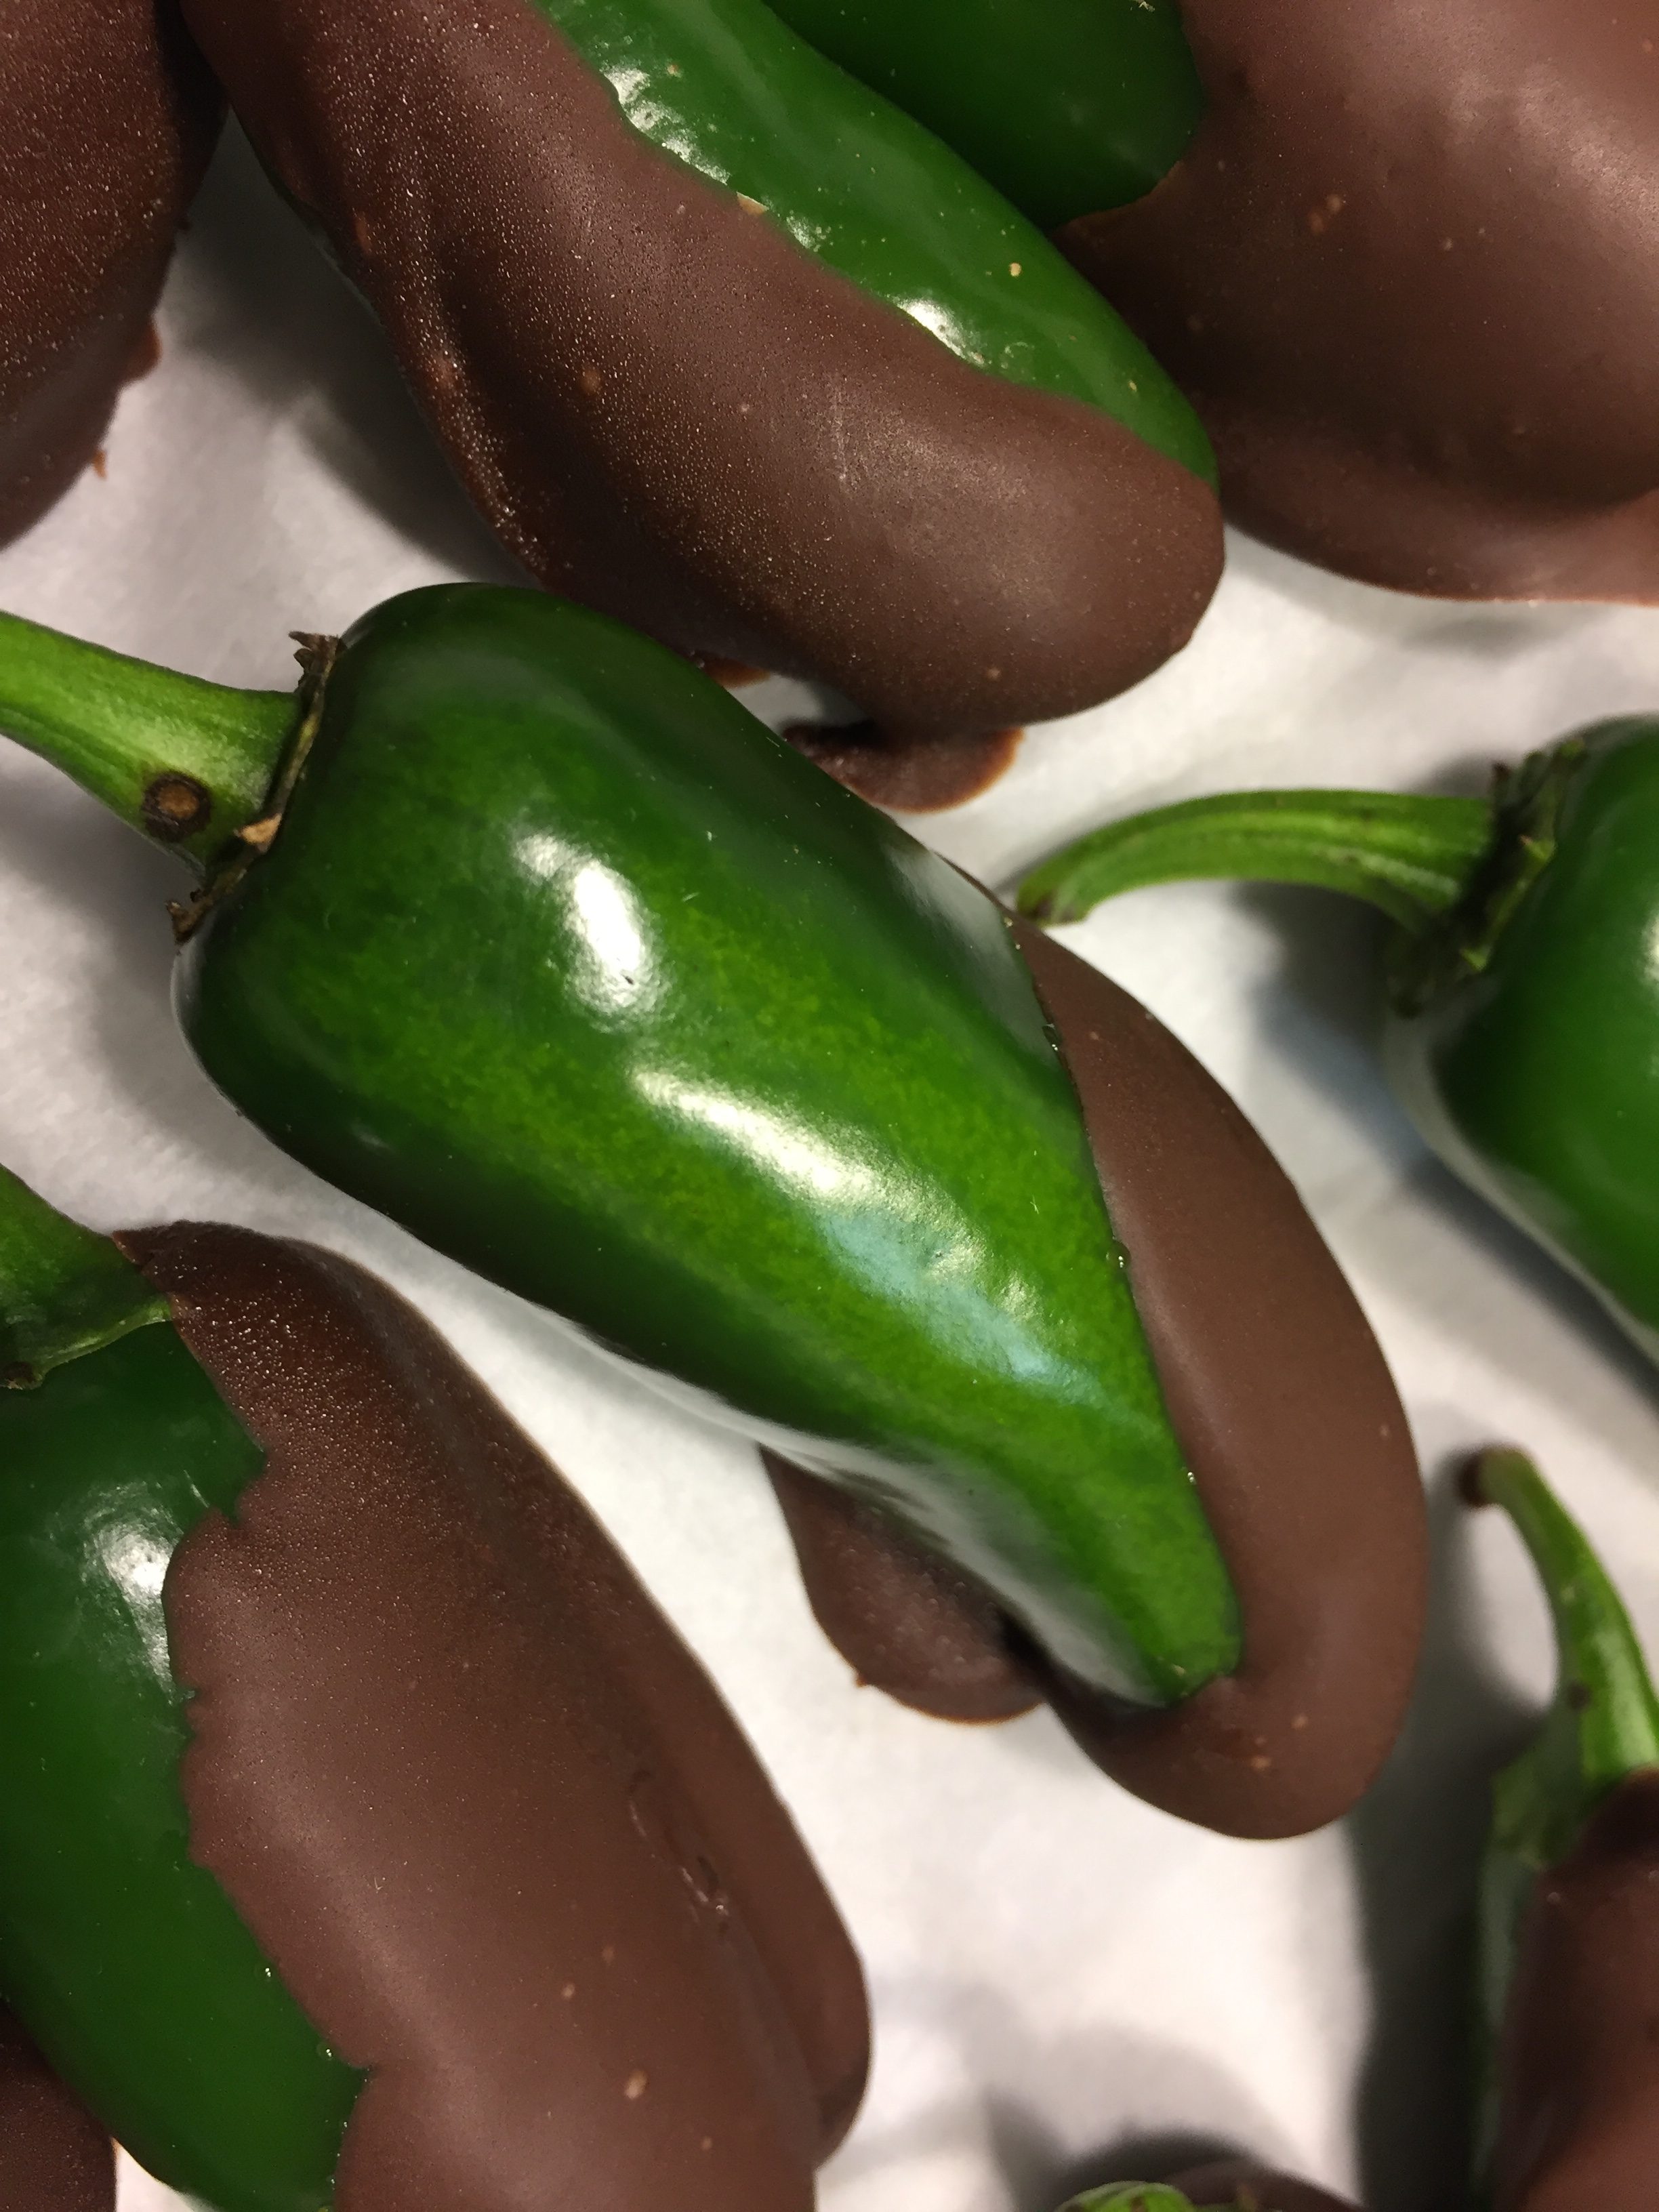 Organic Jalapeno Peppers Dipped in Organic Chocolate